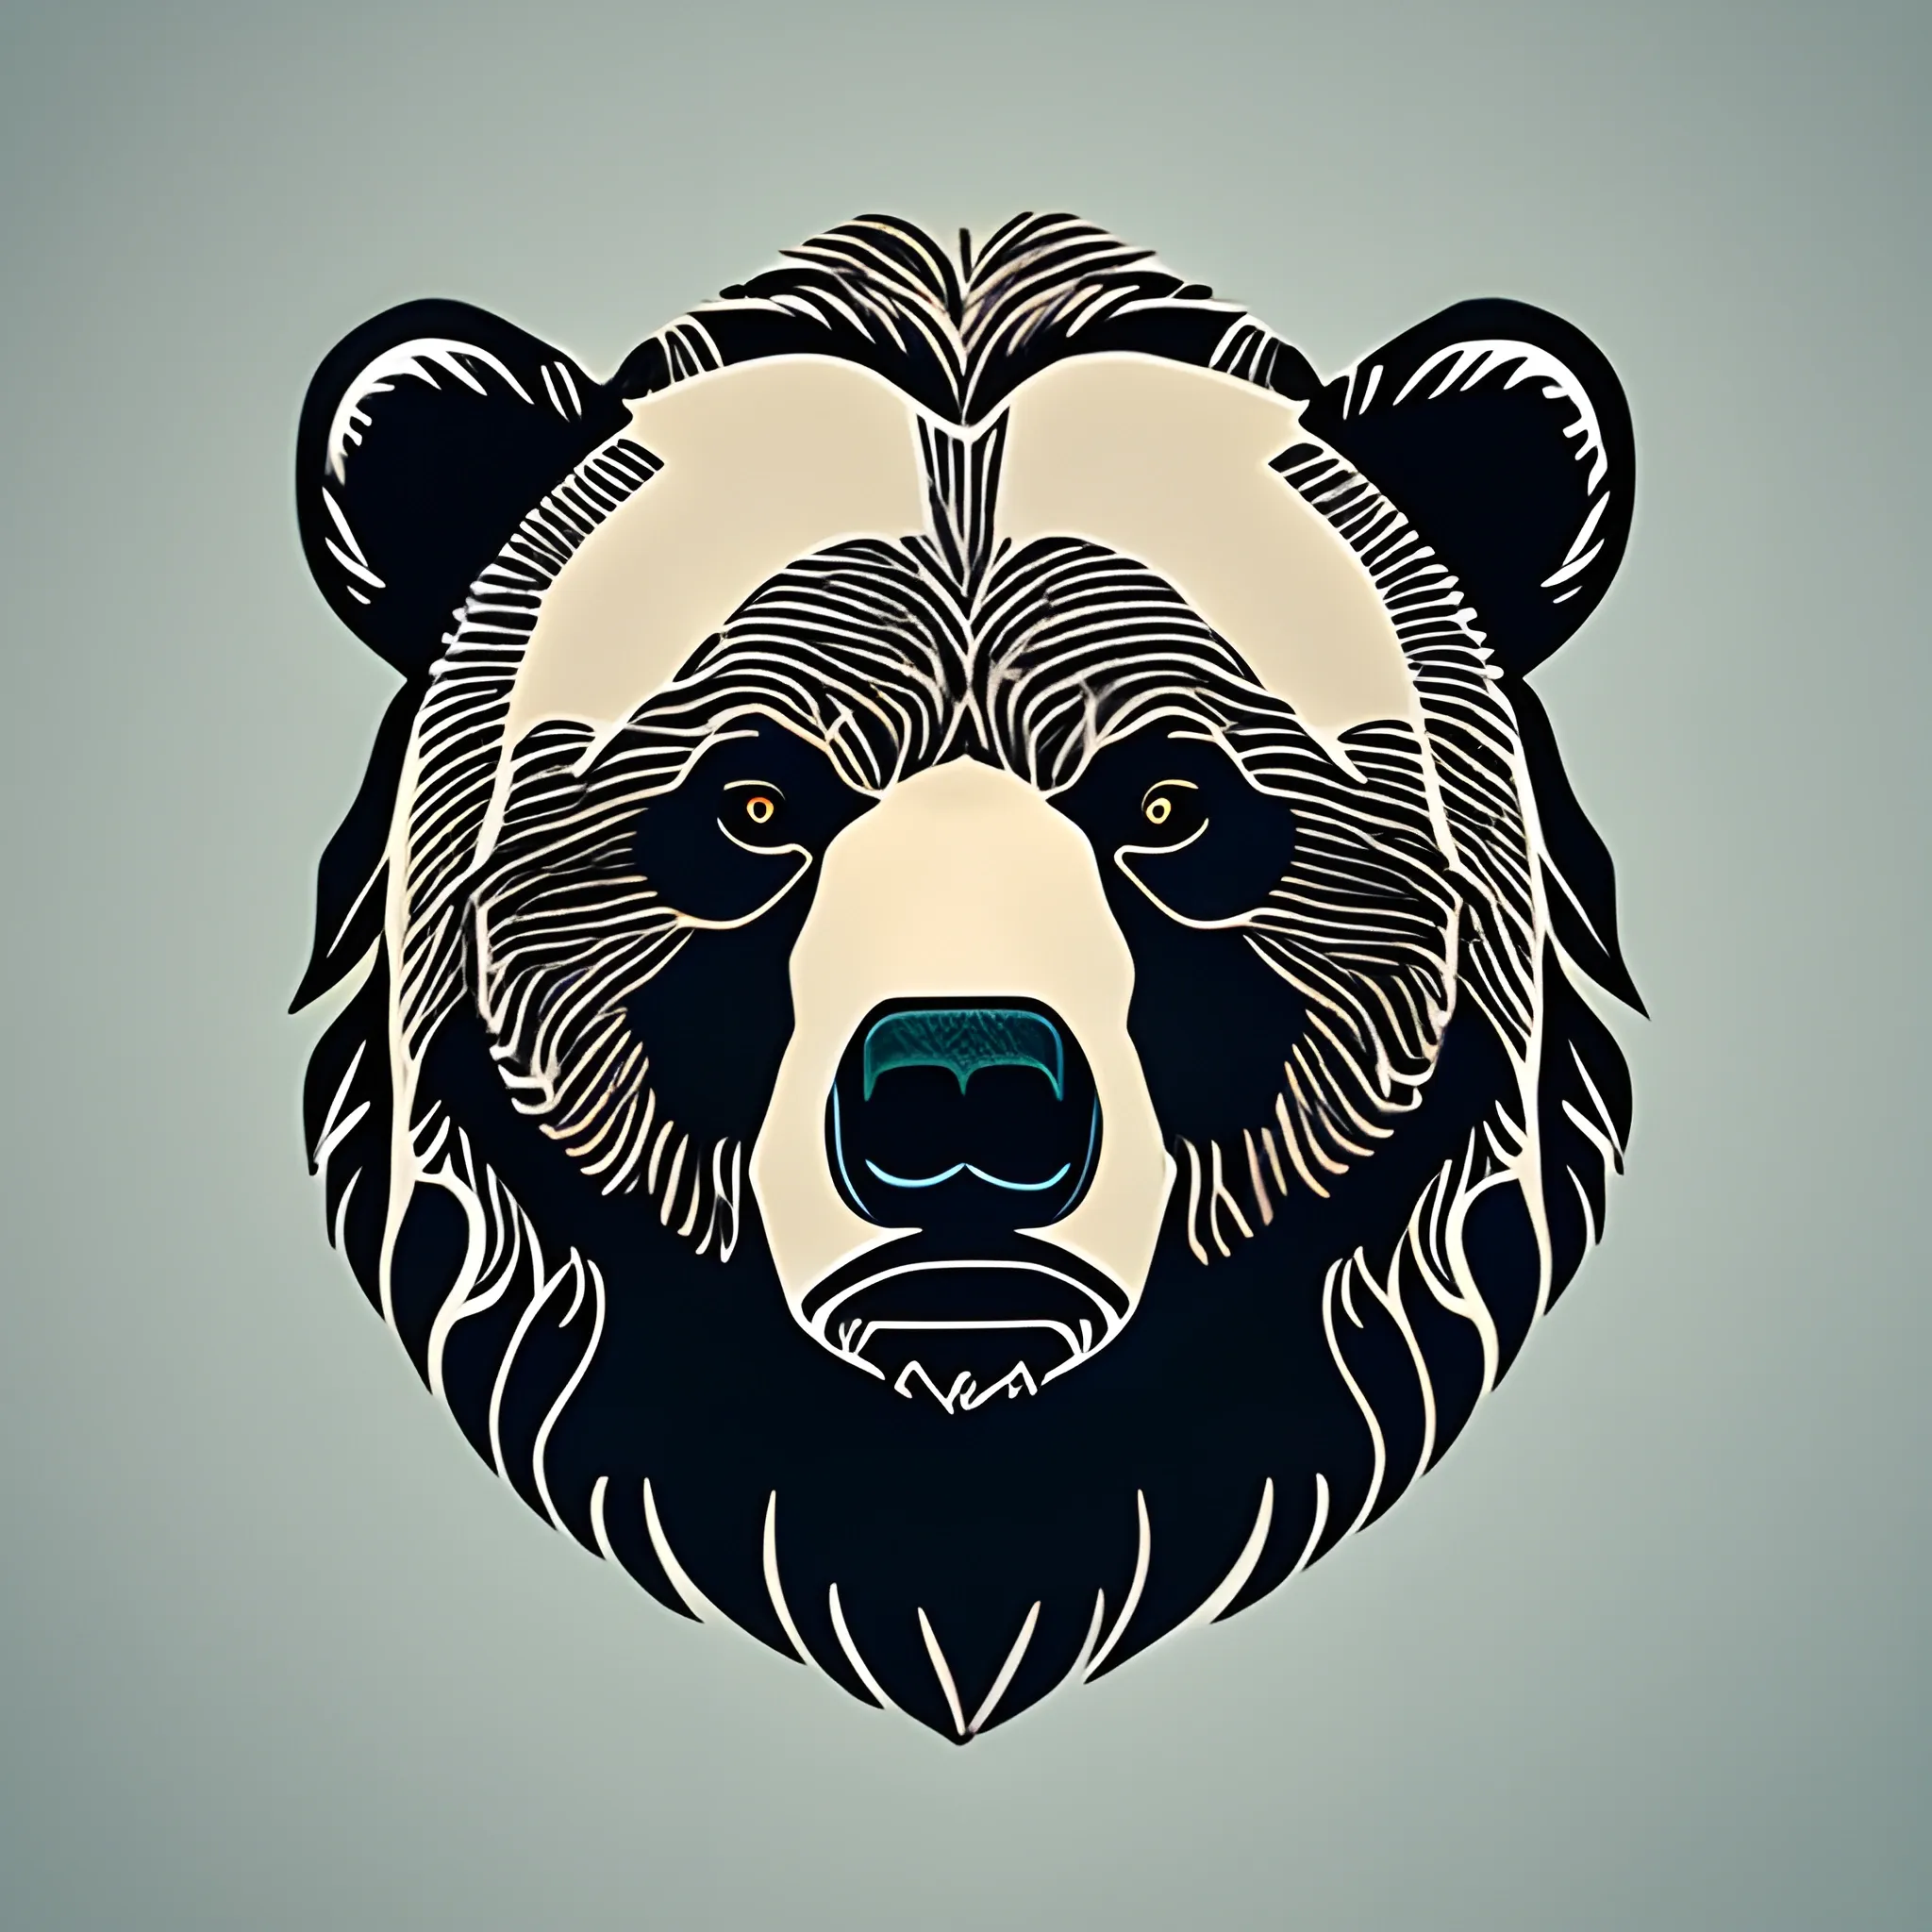 grizzly bear logo style